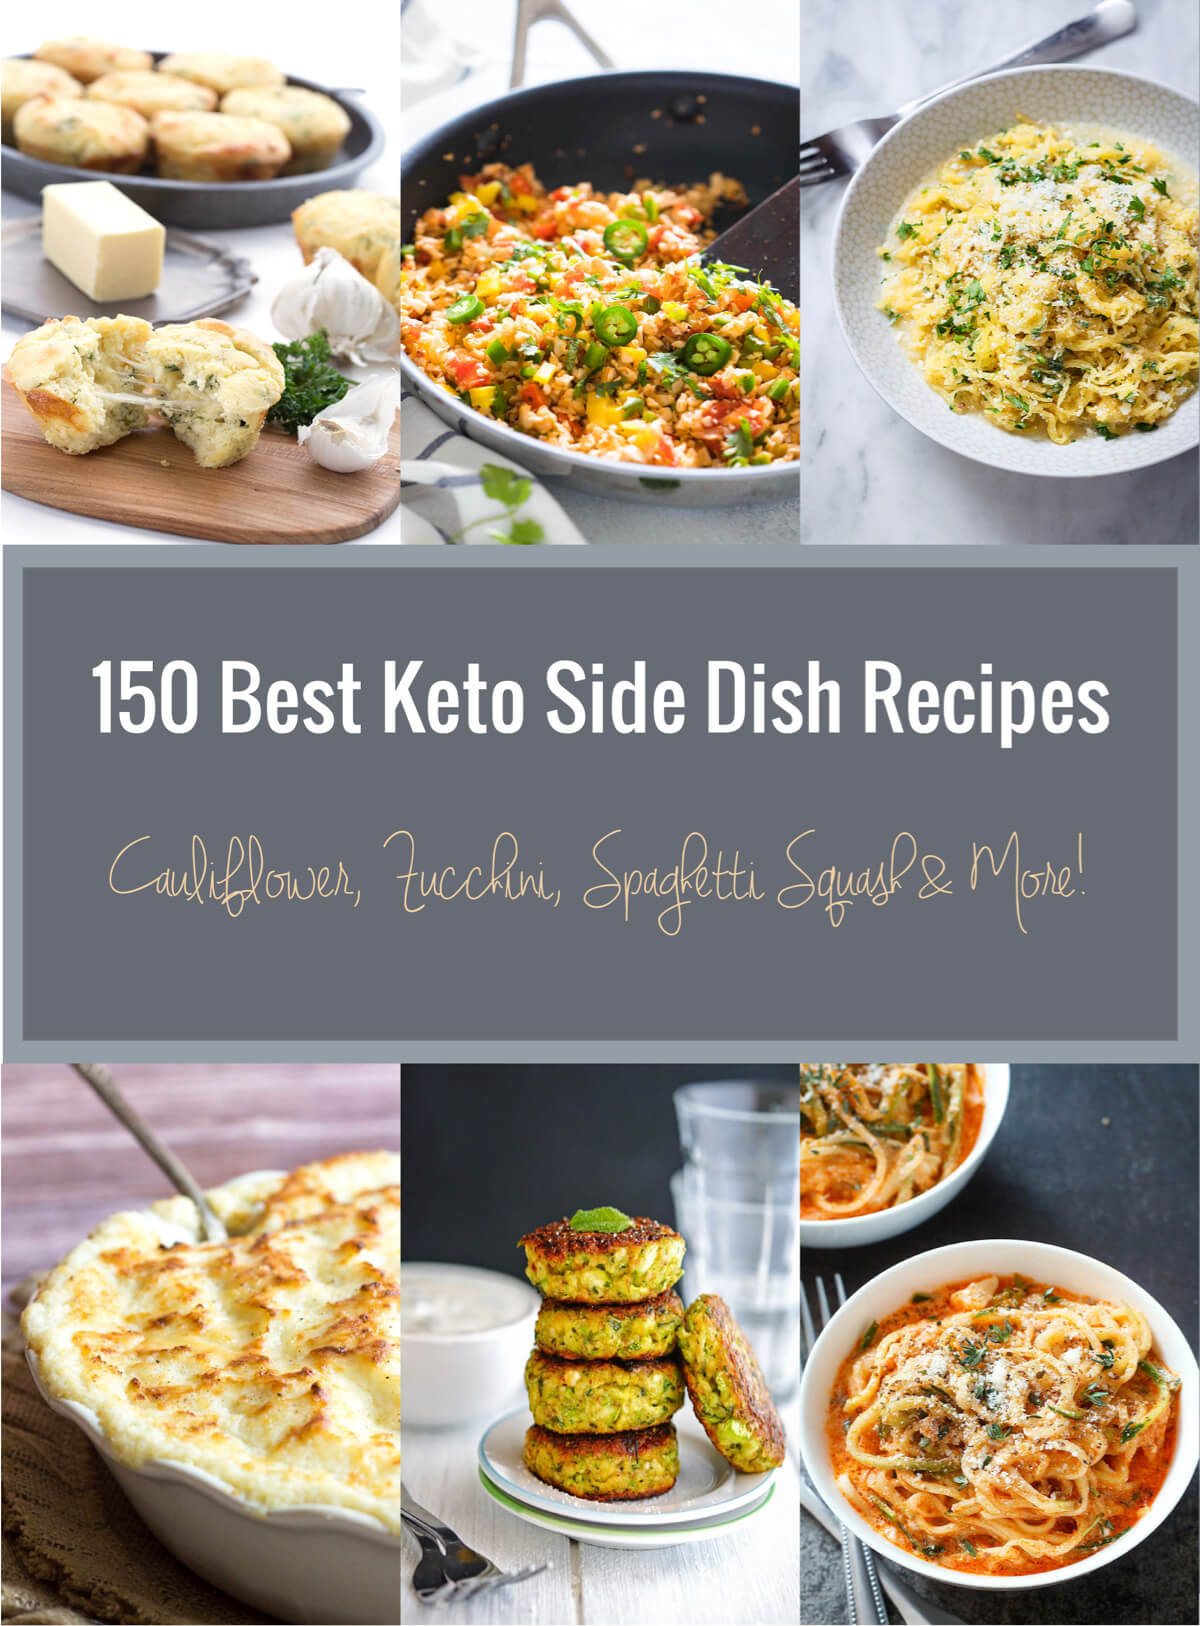 Healthy Keto Sides
 150 Best Keto Side Dish Recipes Low Carb